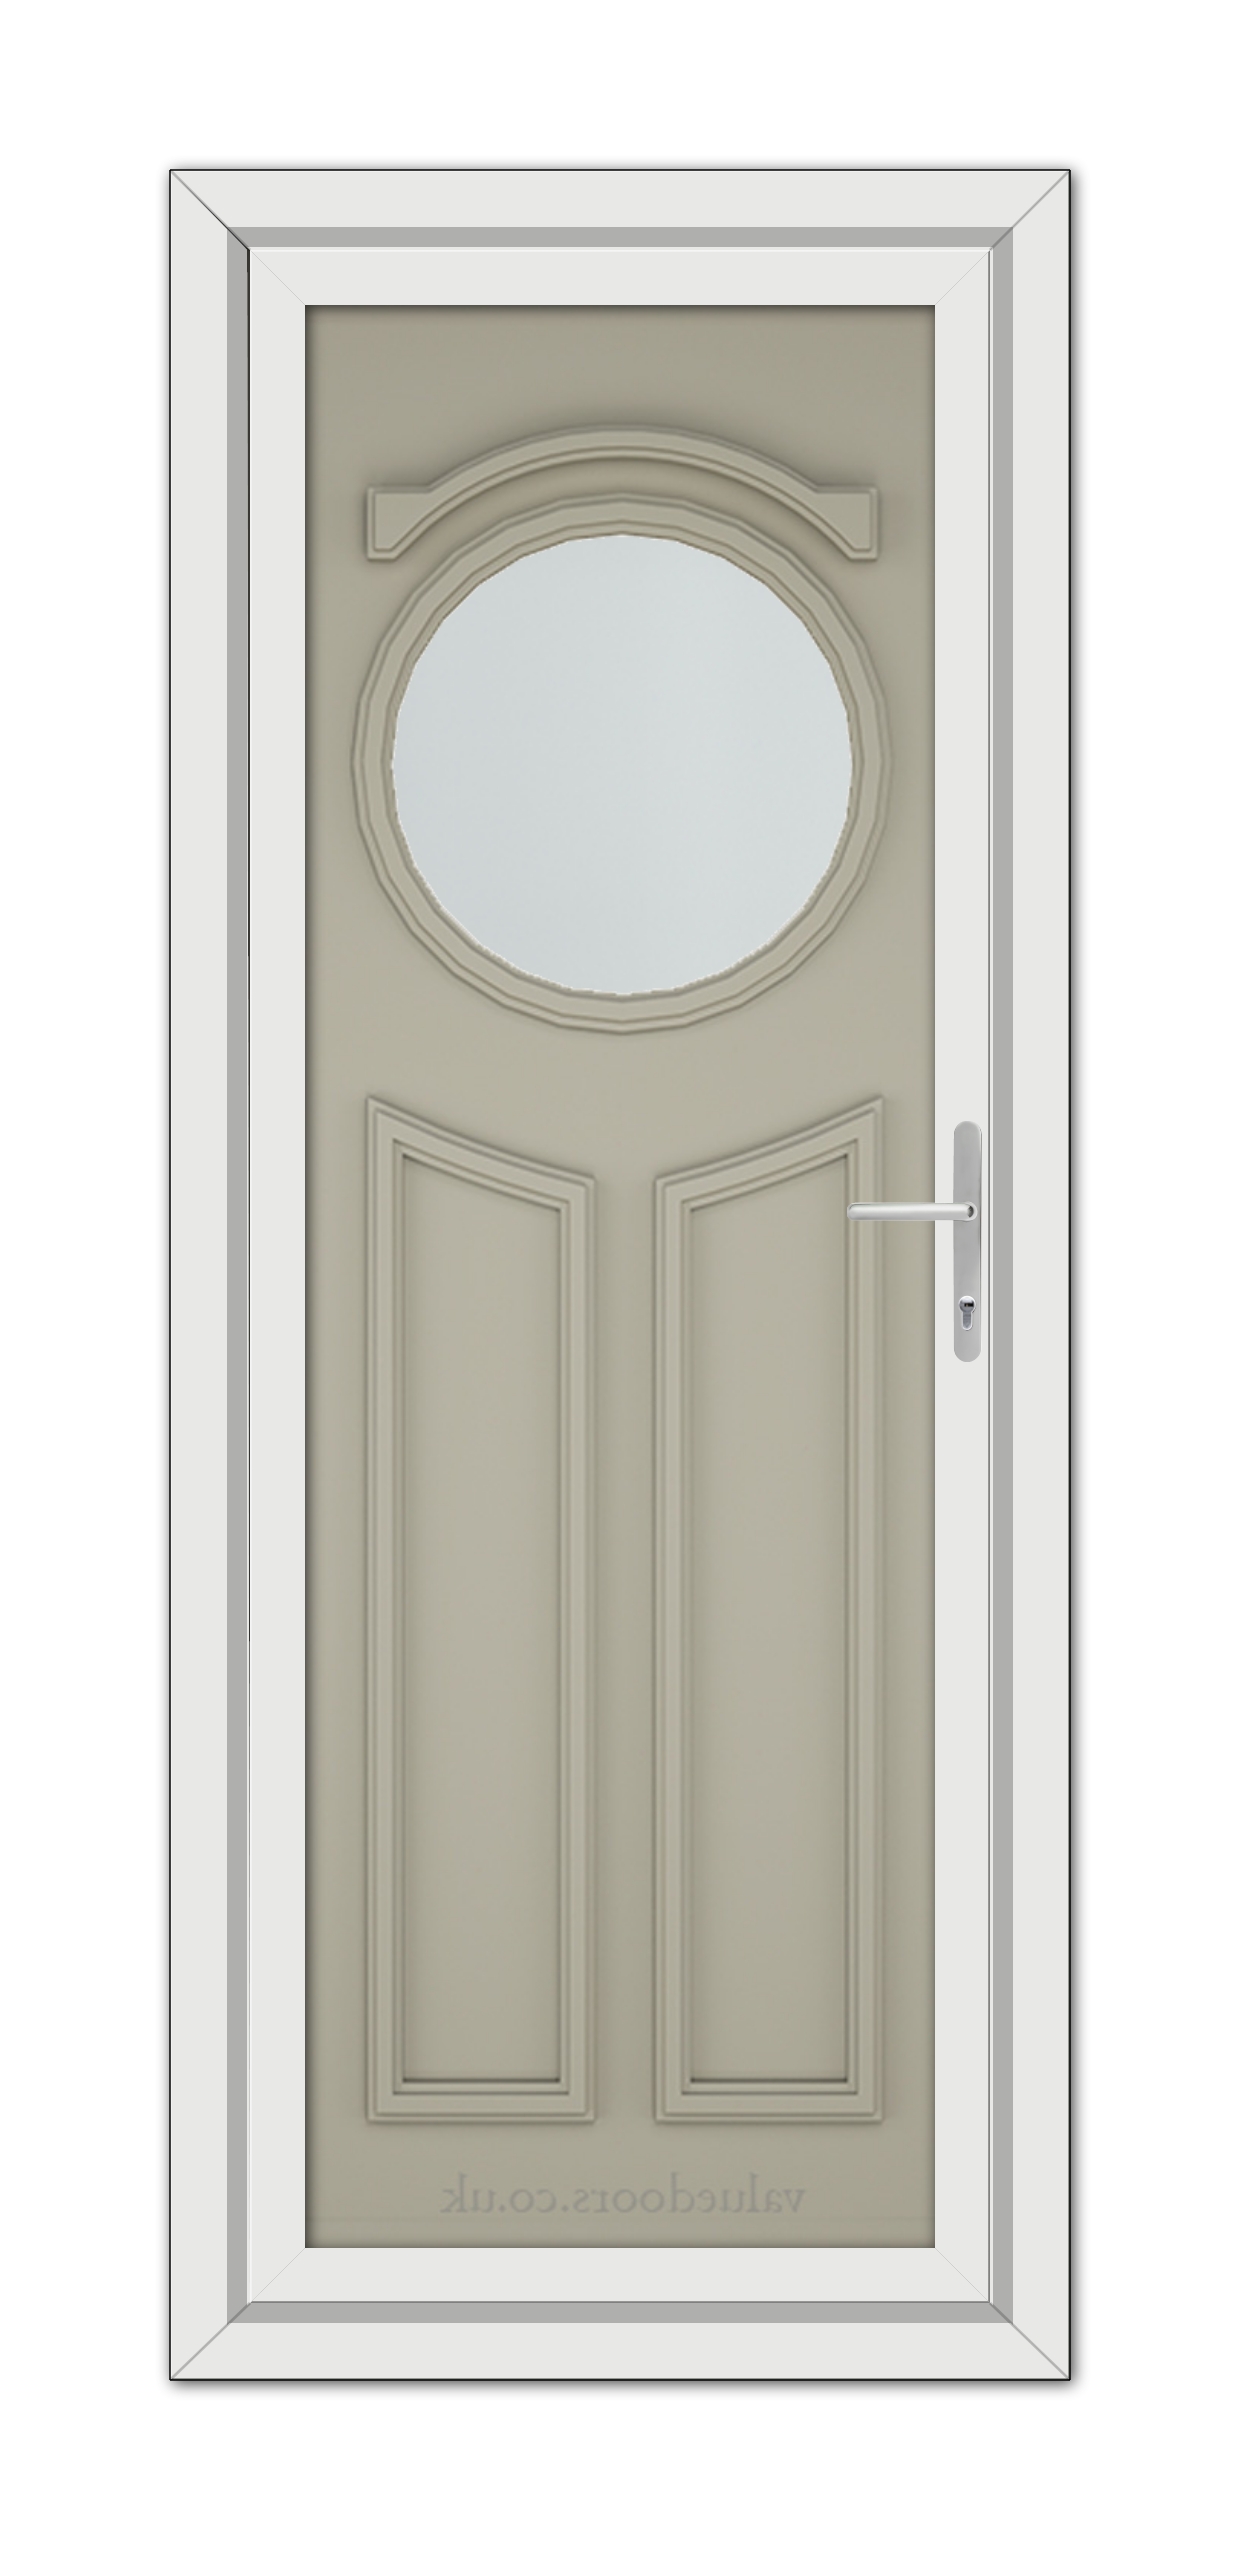 A Pebble Grey Blenheim uPVC door featuring an oval glass window at the top and a white handle, encased in a white door frame.